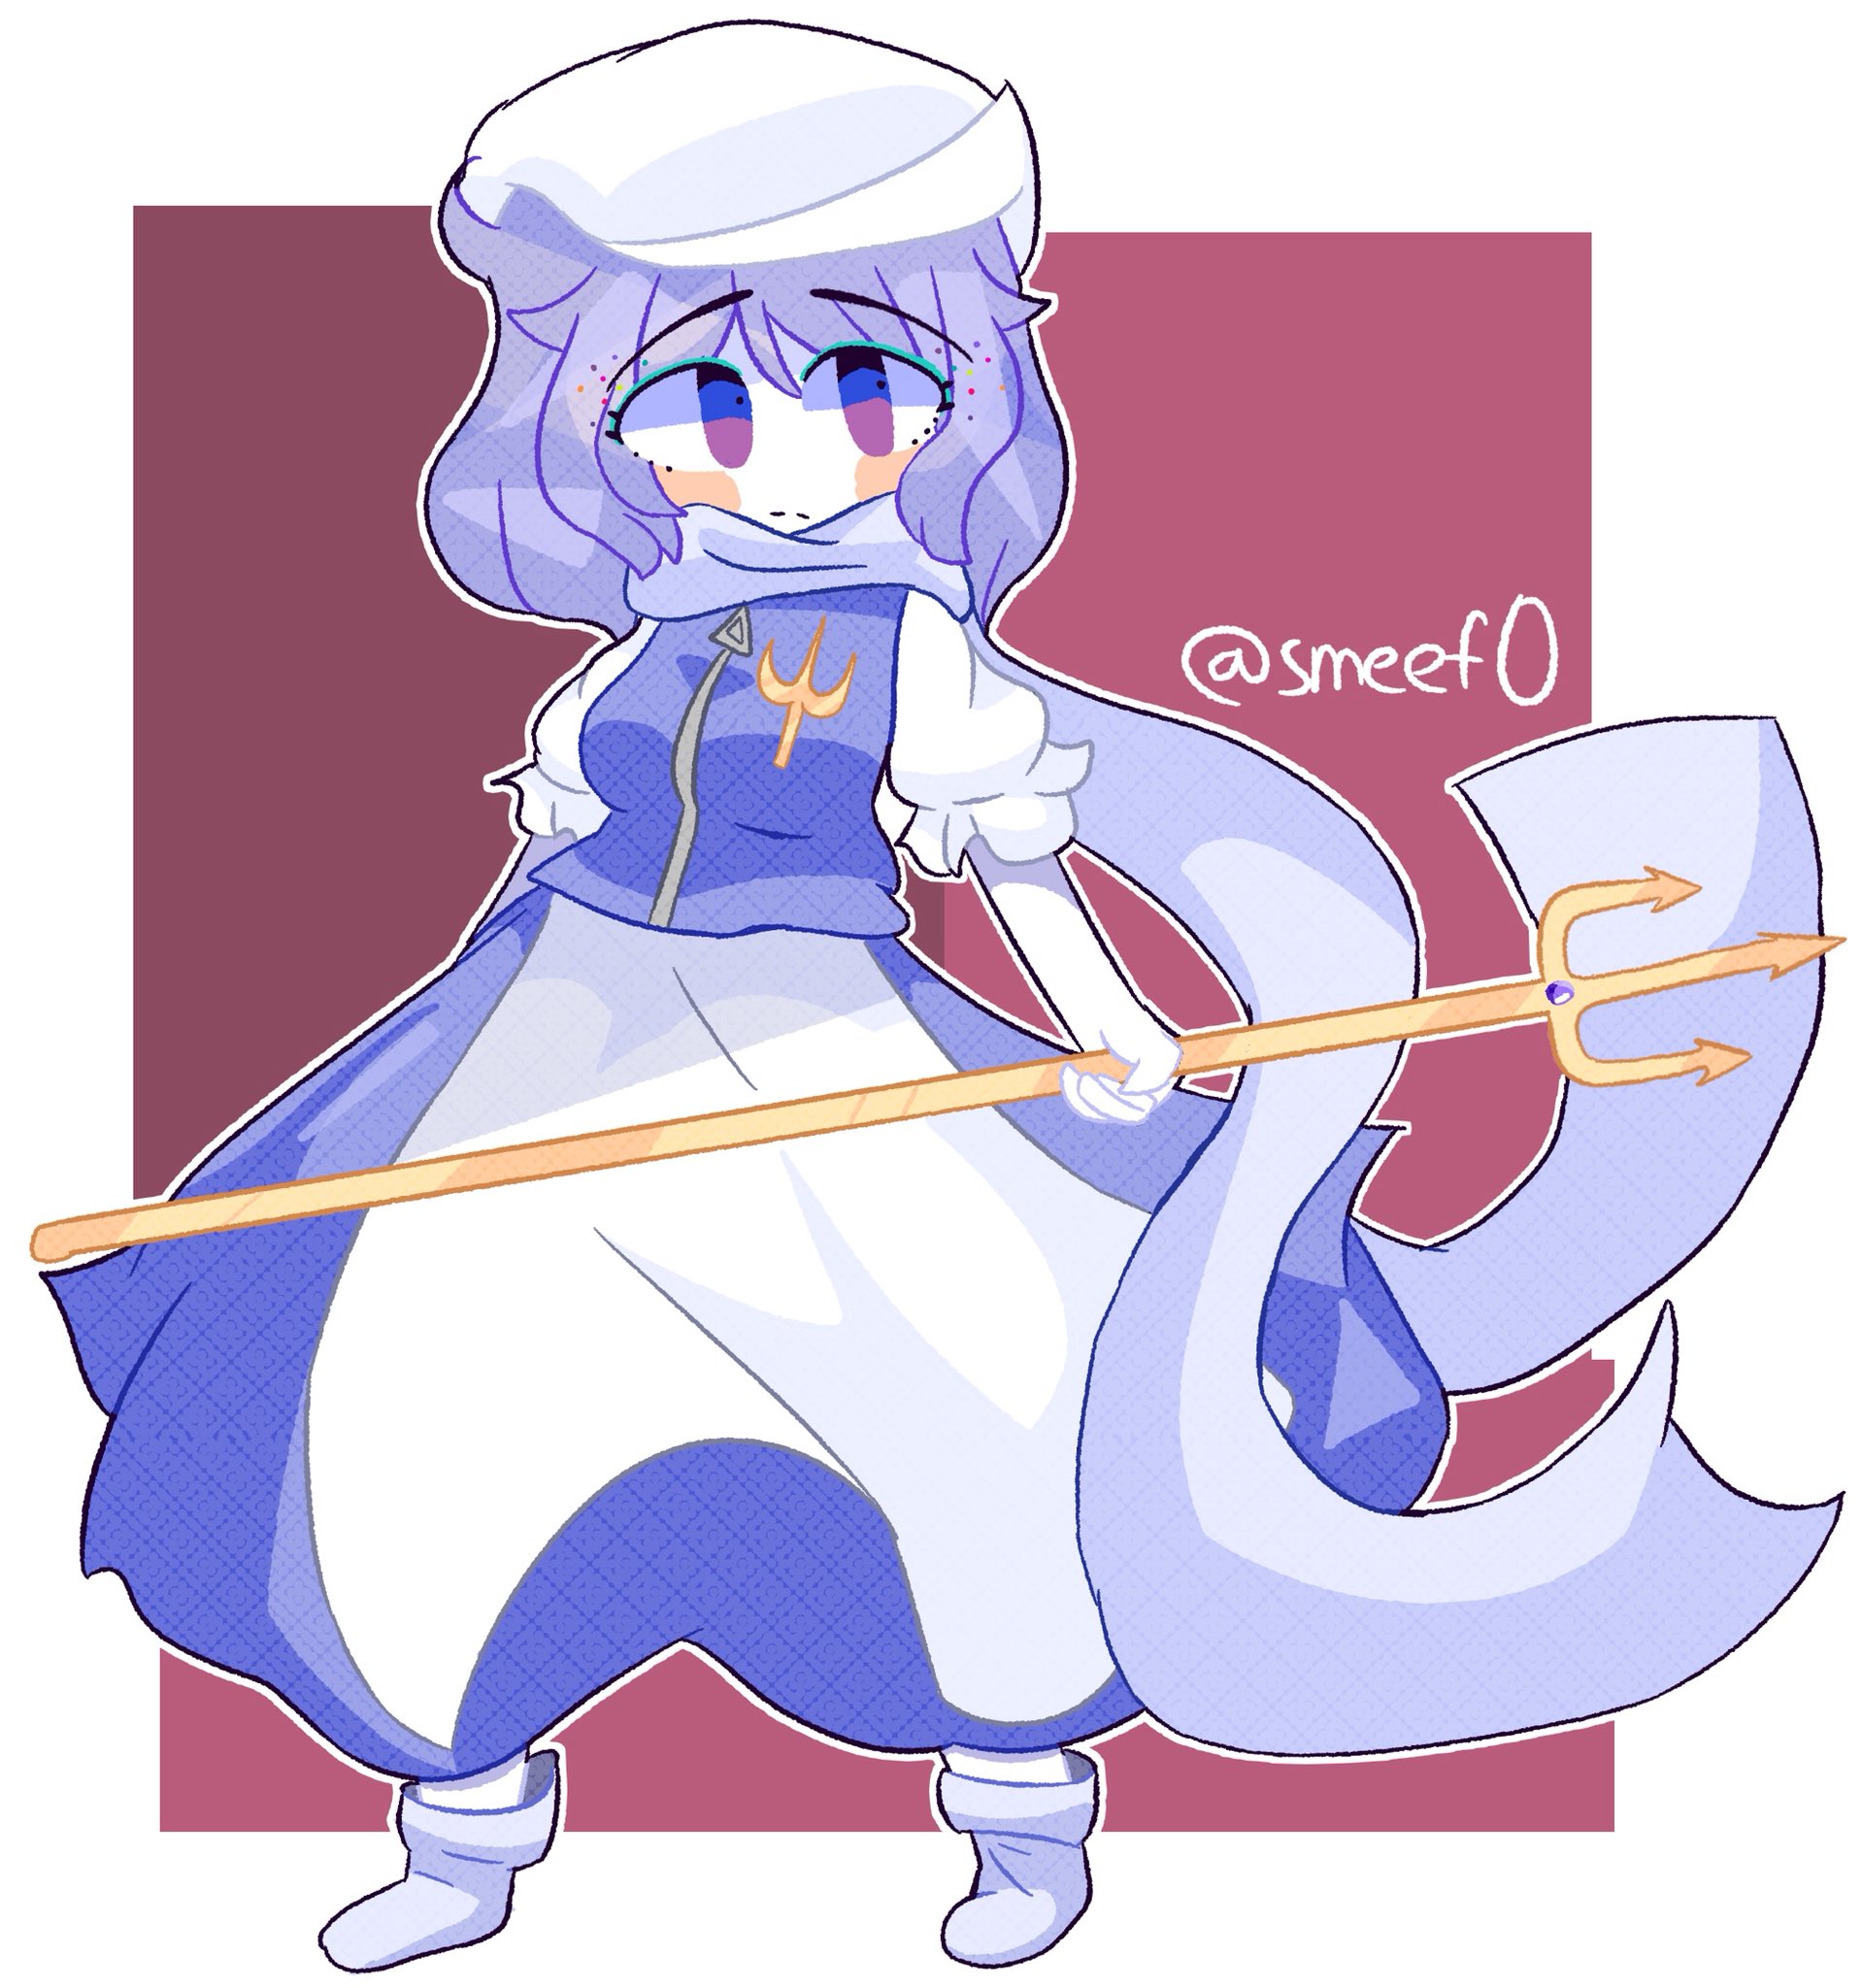 Smeef Letty Whiterock Commissioned By Arcluz77 Uwu レティ ホワイトロック 東方 東方project Touhou T Co Crnomds6iu Twitter